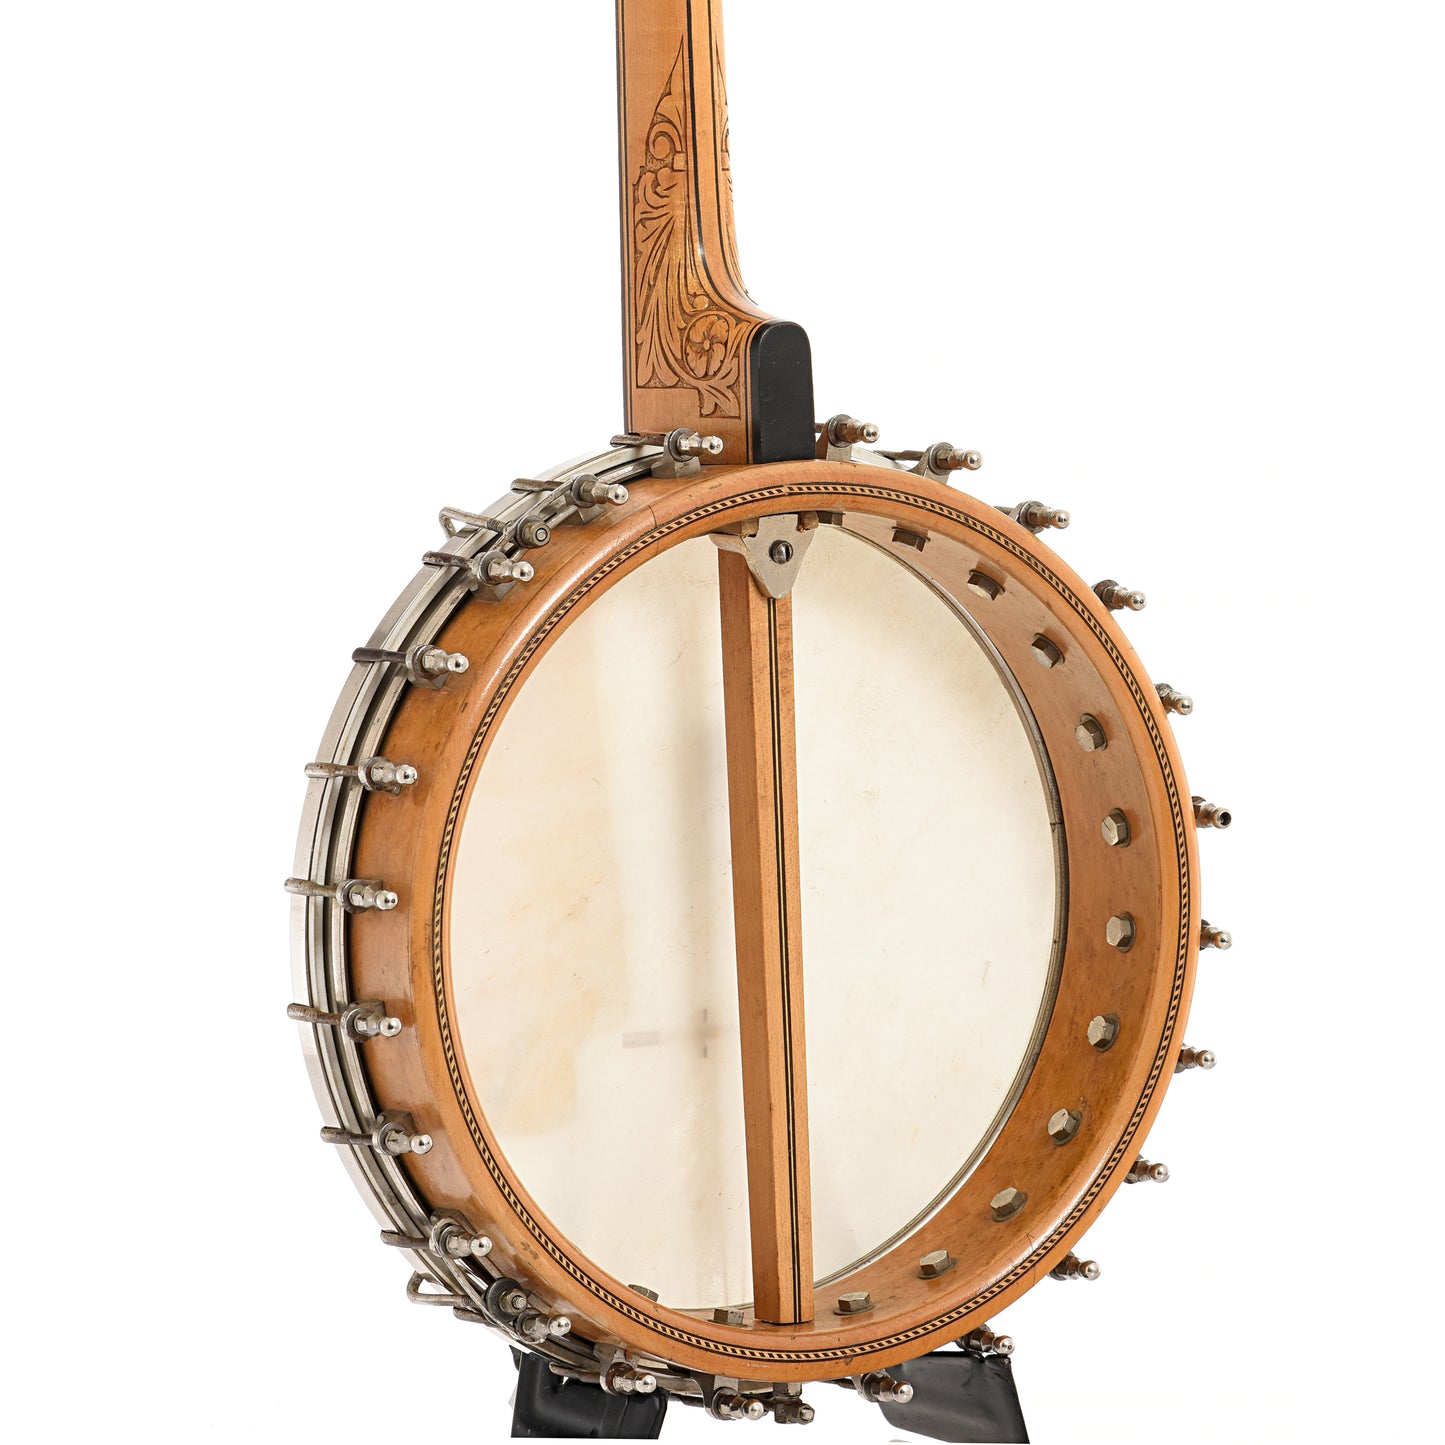 Back and side of Orpheum No.2 Tenor Banjo (c.1920)